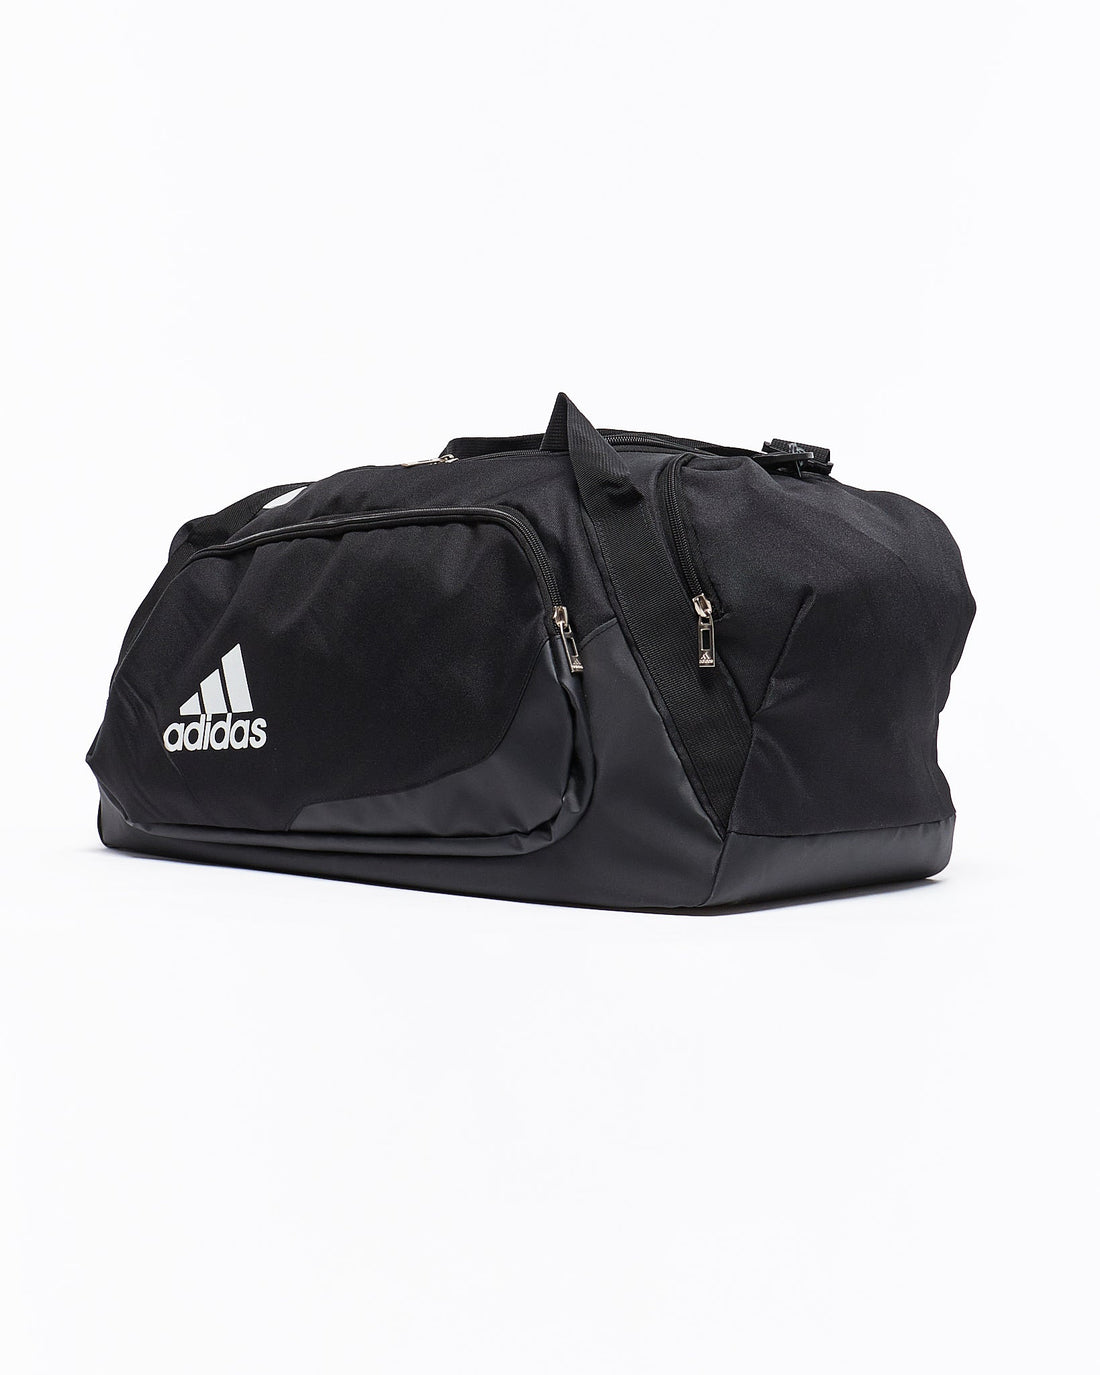 MOI OUTFIT-Logo Printed Sport Duffle Bag 22.90